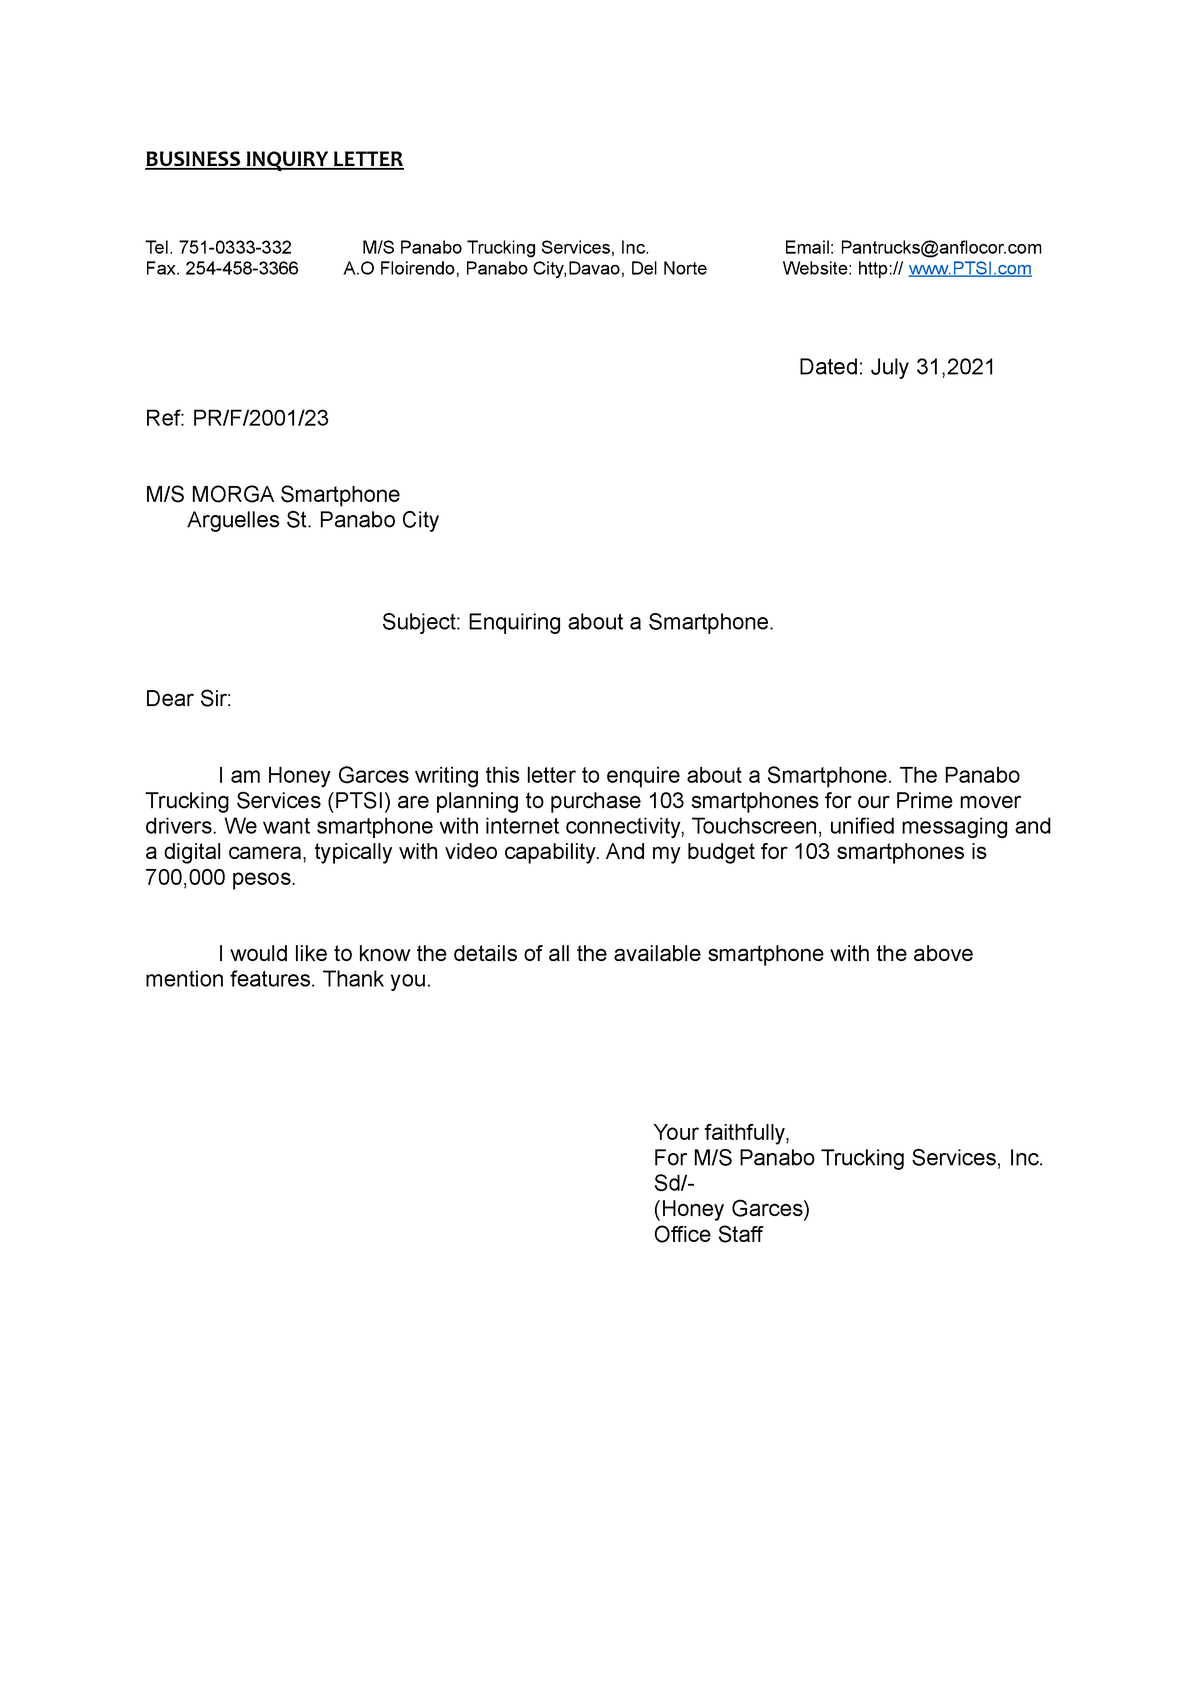 Business Letter Garces & Caluban - BUSINESS INQUIRY LETTER Tel. 751 ...